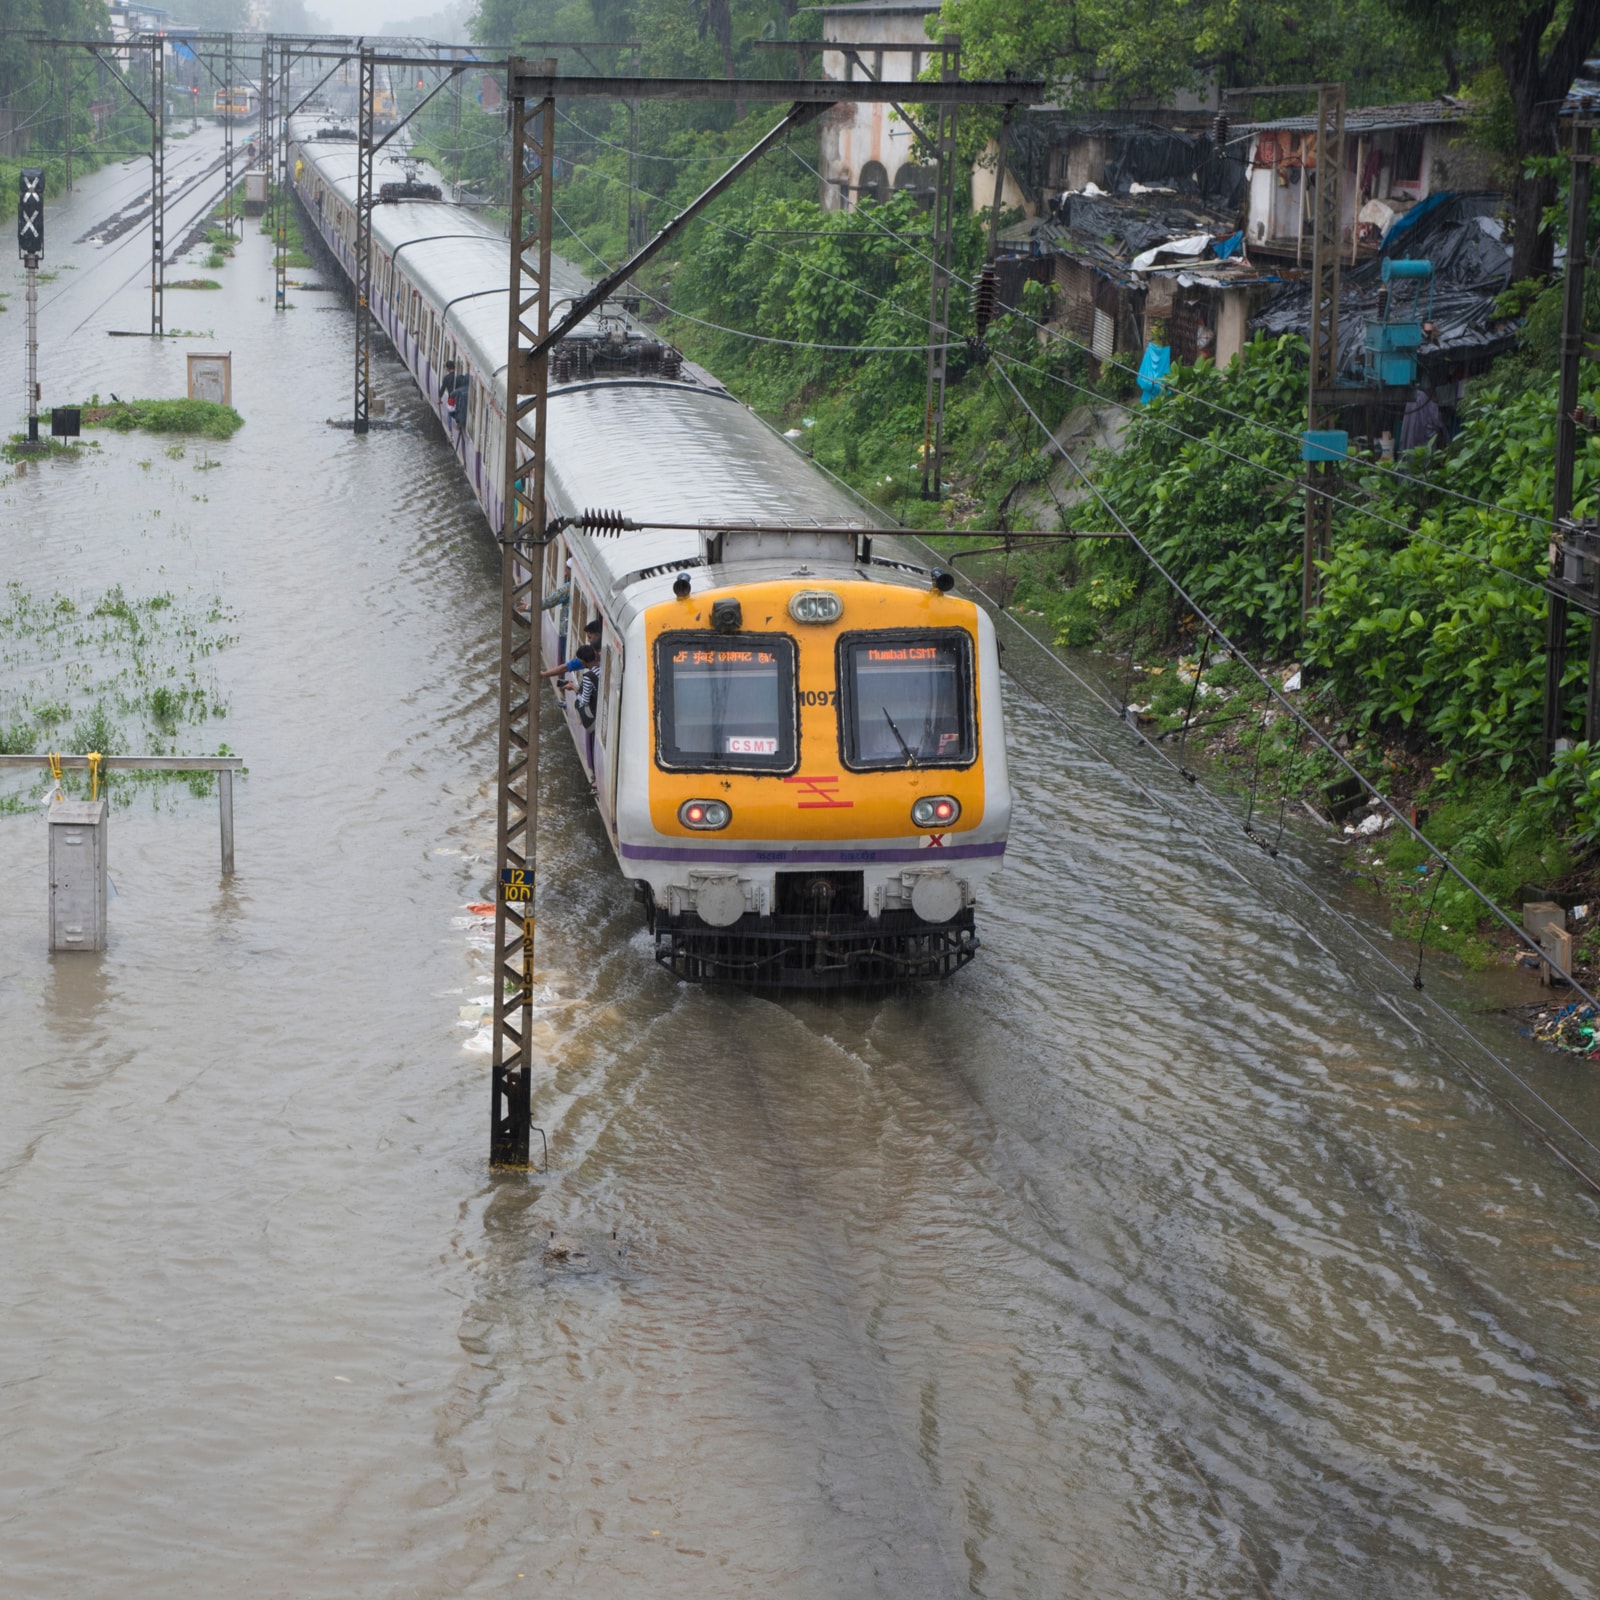 Indian Railways Gears Up For Monsoon, Safety Checks in Place - News18